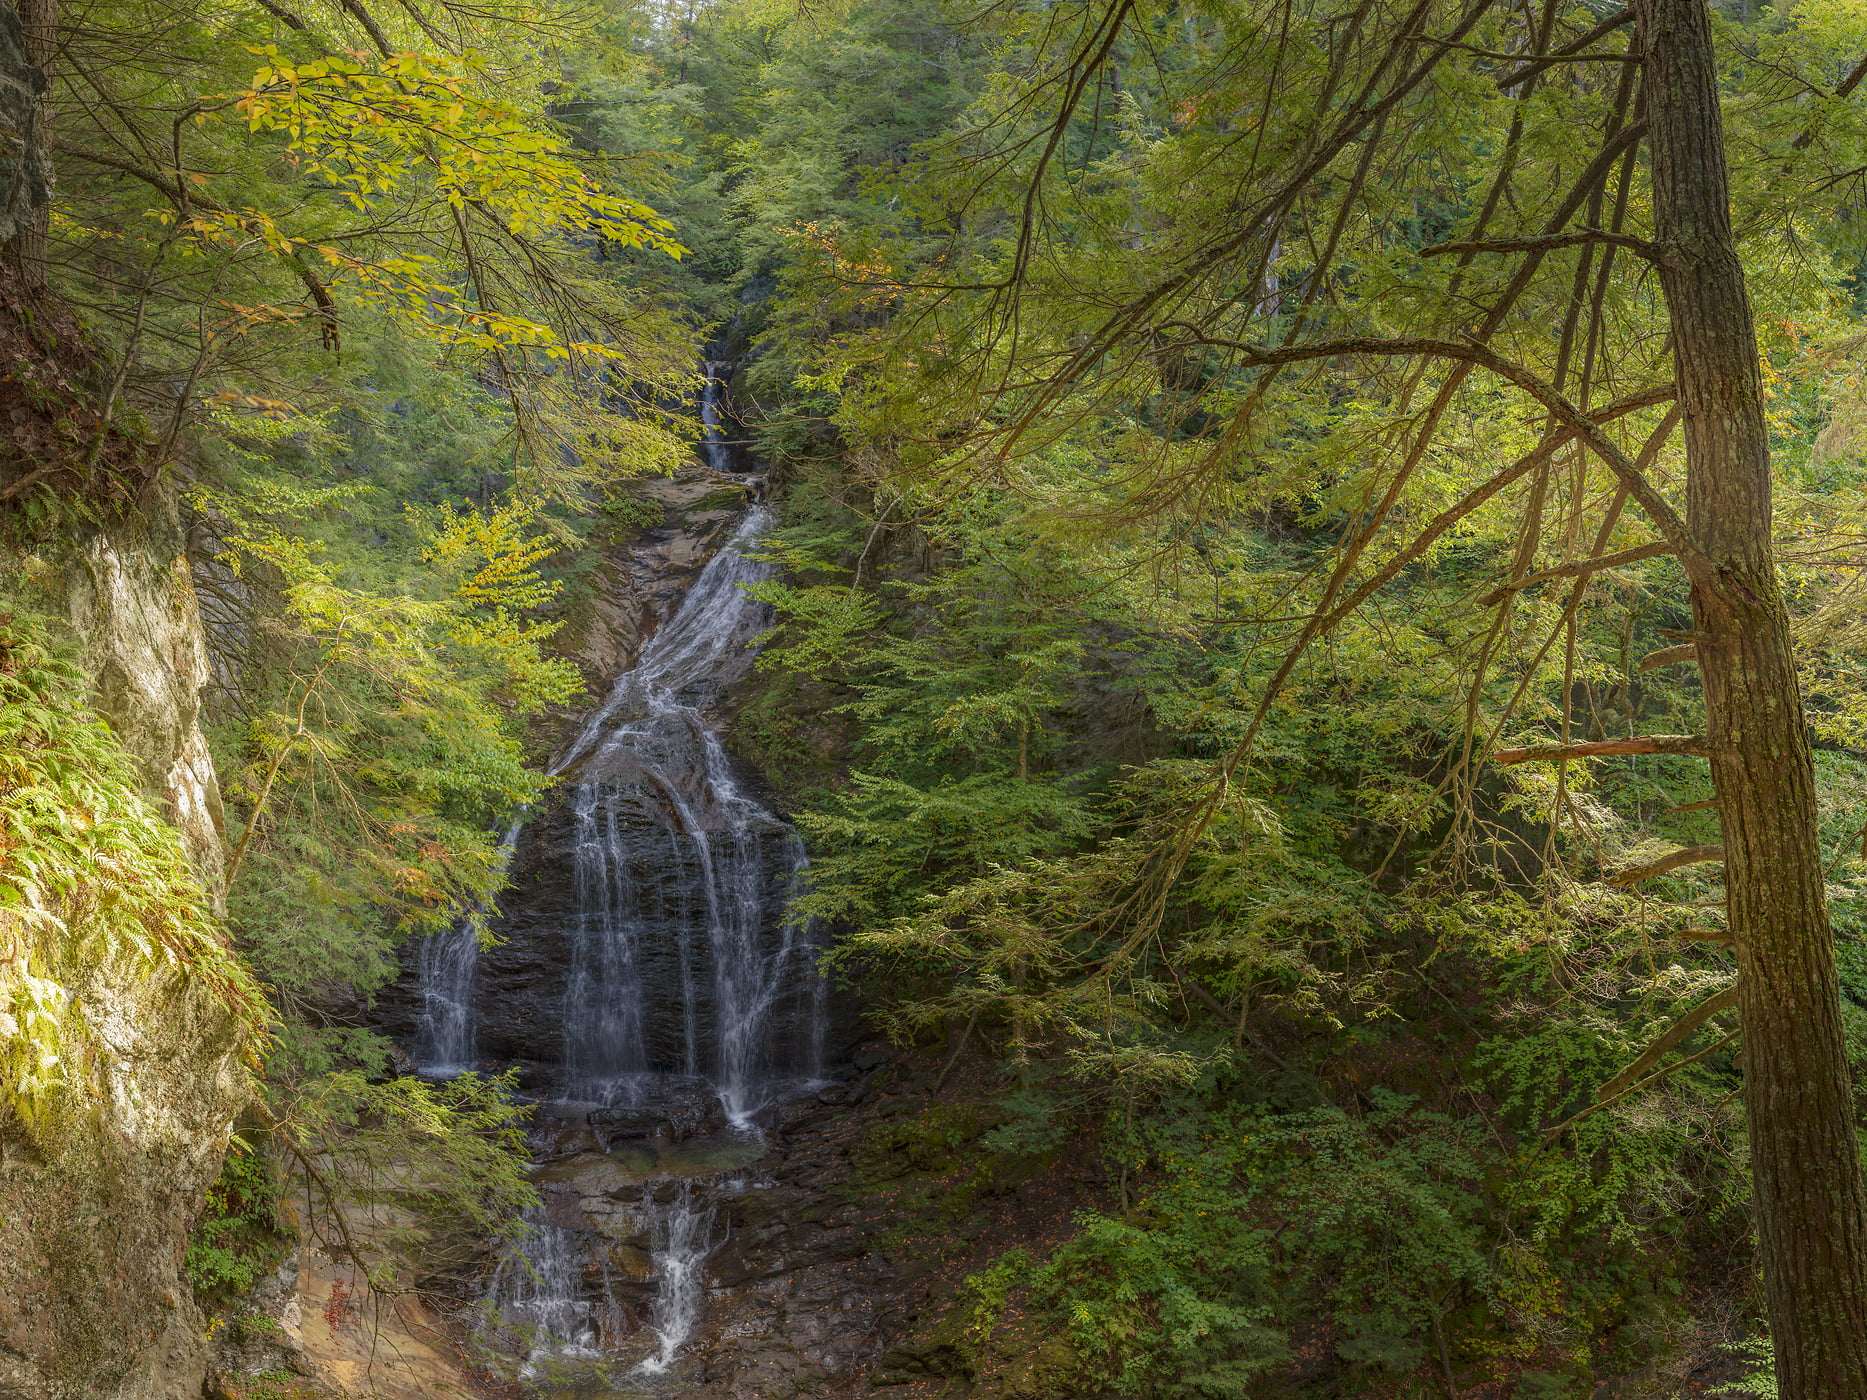 1,106 megapixels! A very high resolution, large-format VAST photo print of a waterfall in the forest; nature photograph created by John Freeman in Moss Glen Falls Rd, Stowe, Vermont